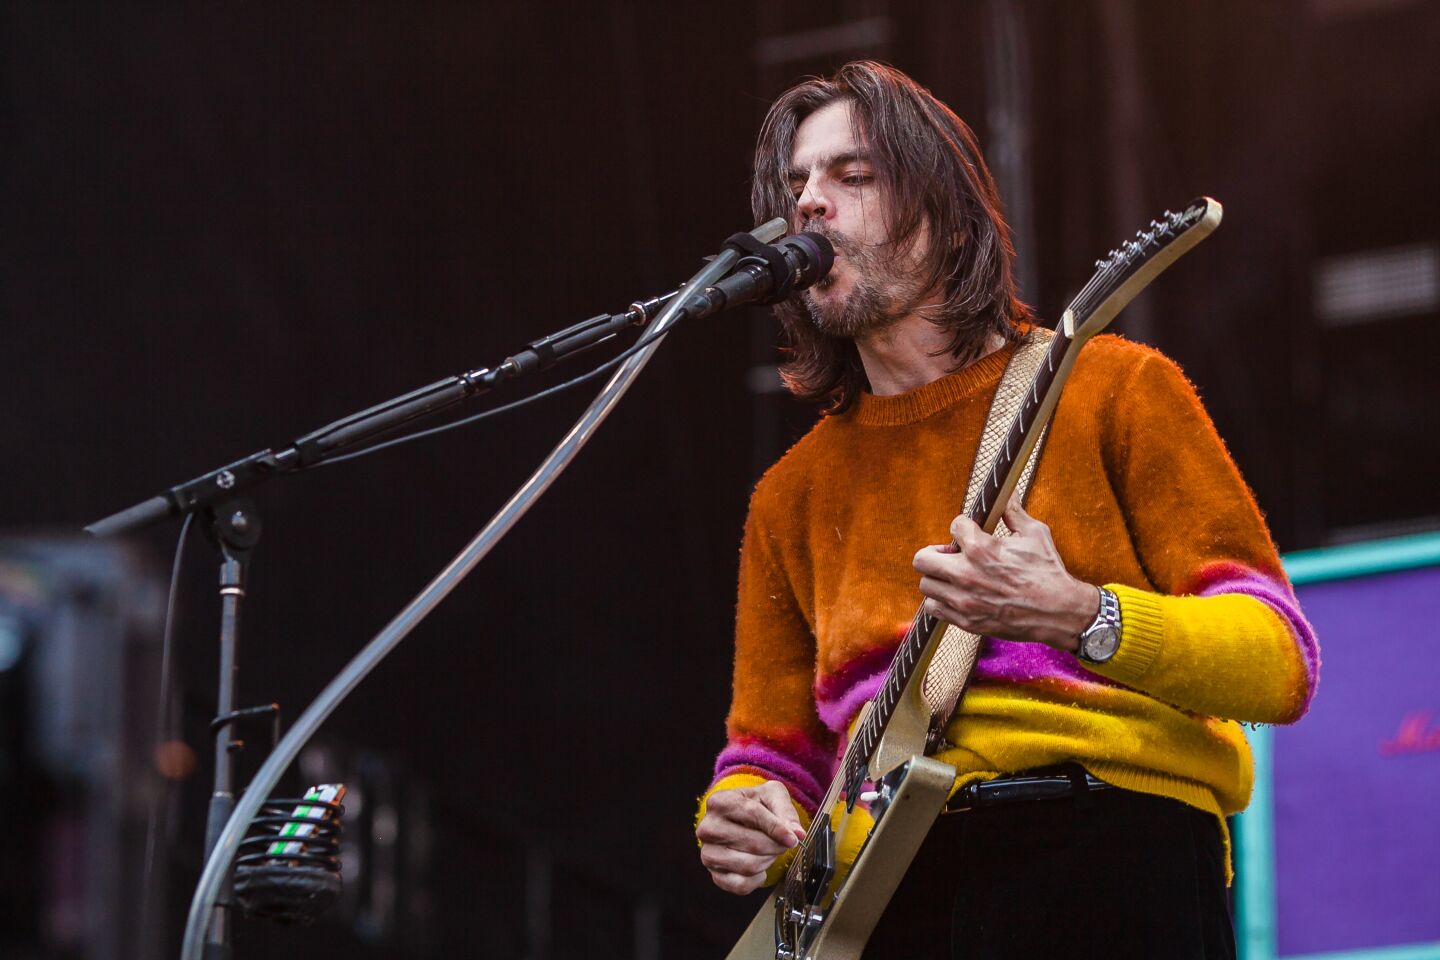 Brian Bell from Weezer at Petco Park during the Hella Mega Tour in downtown San Diego on August 29, 2021.